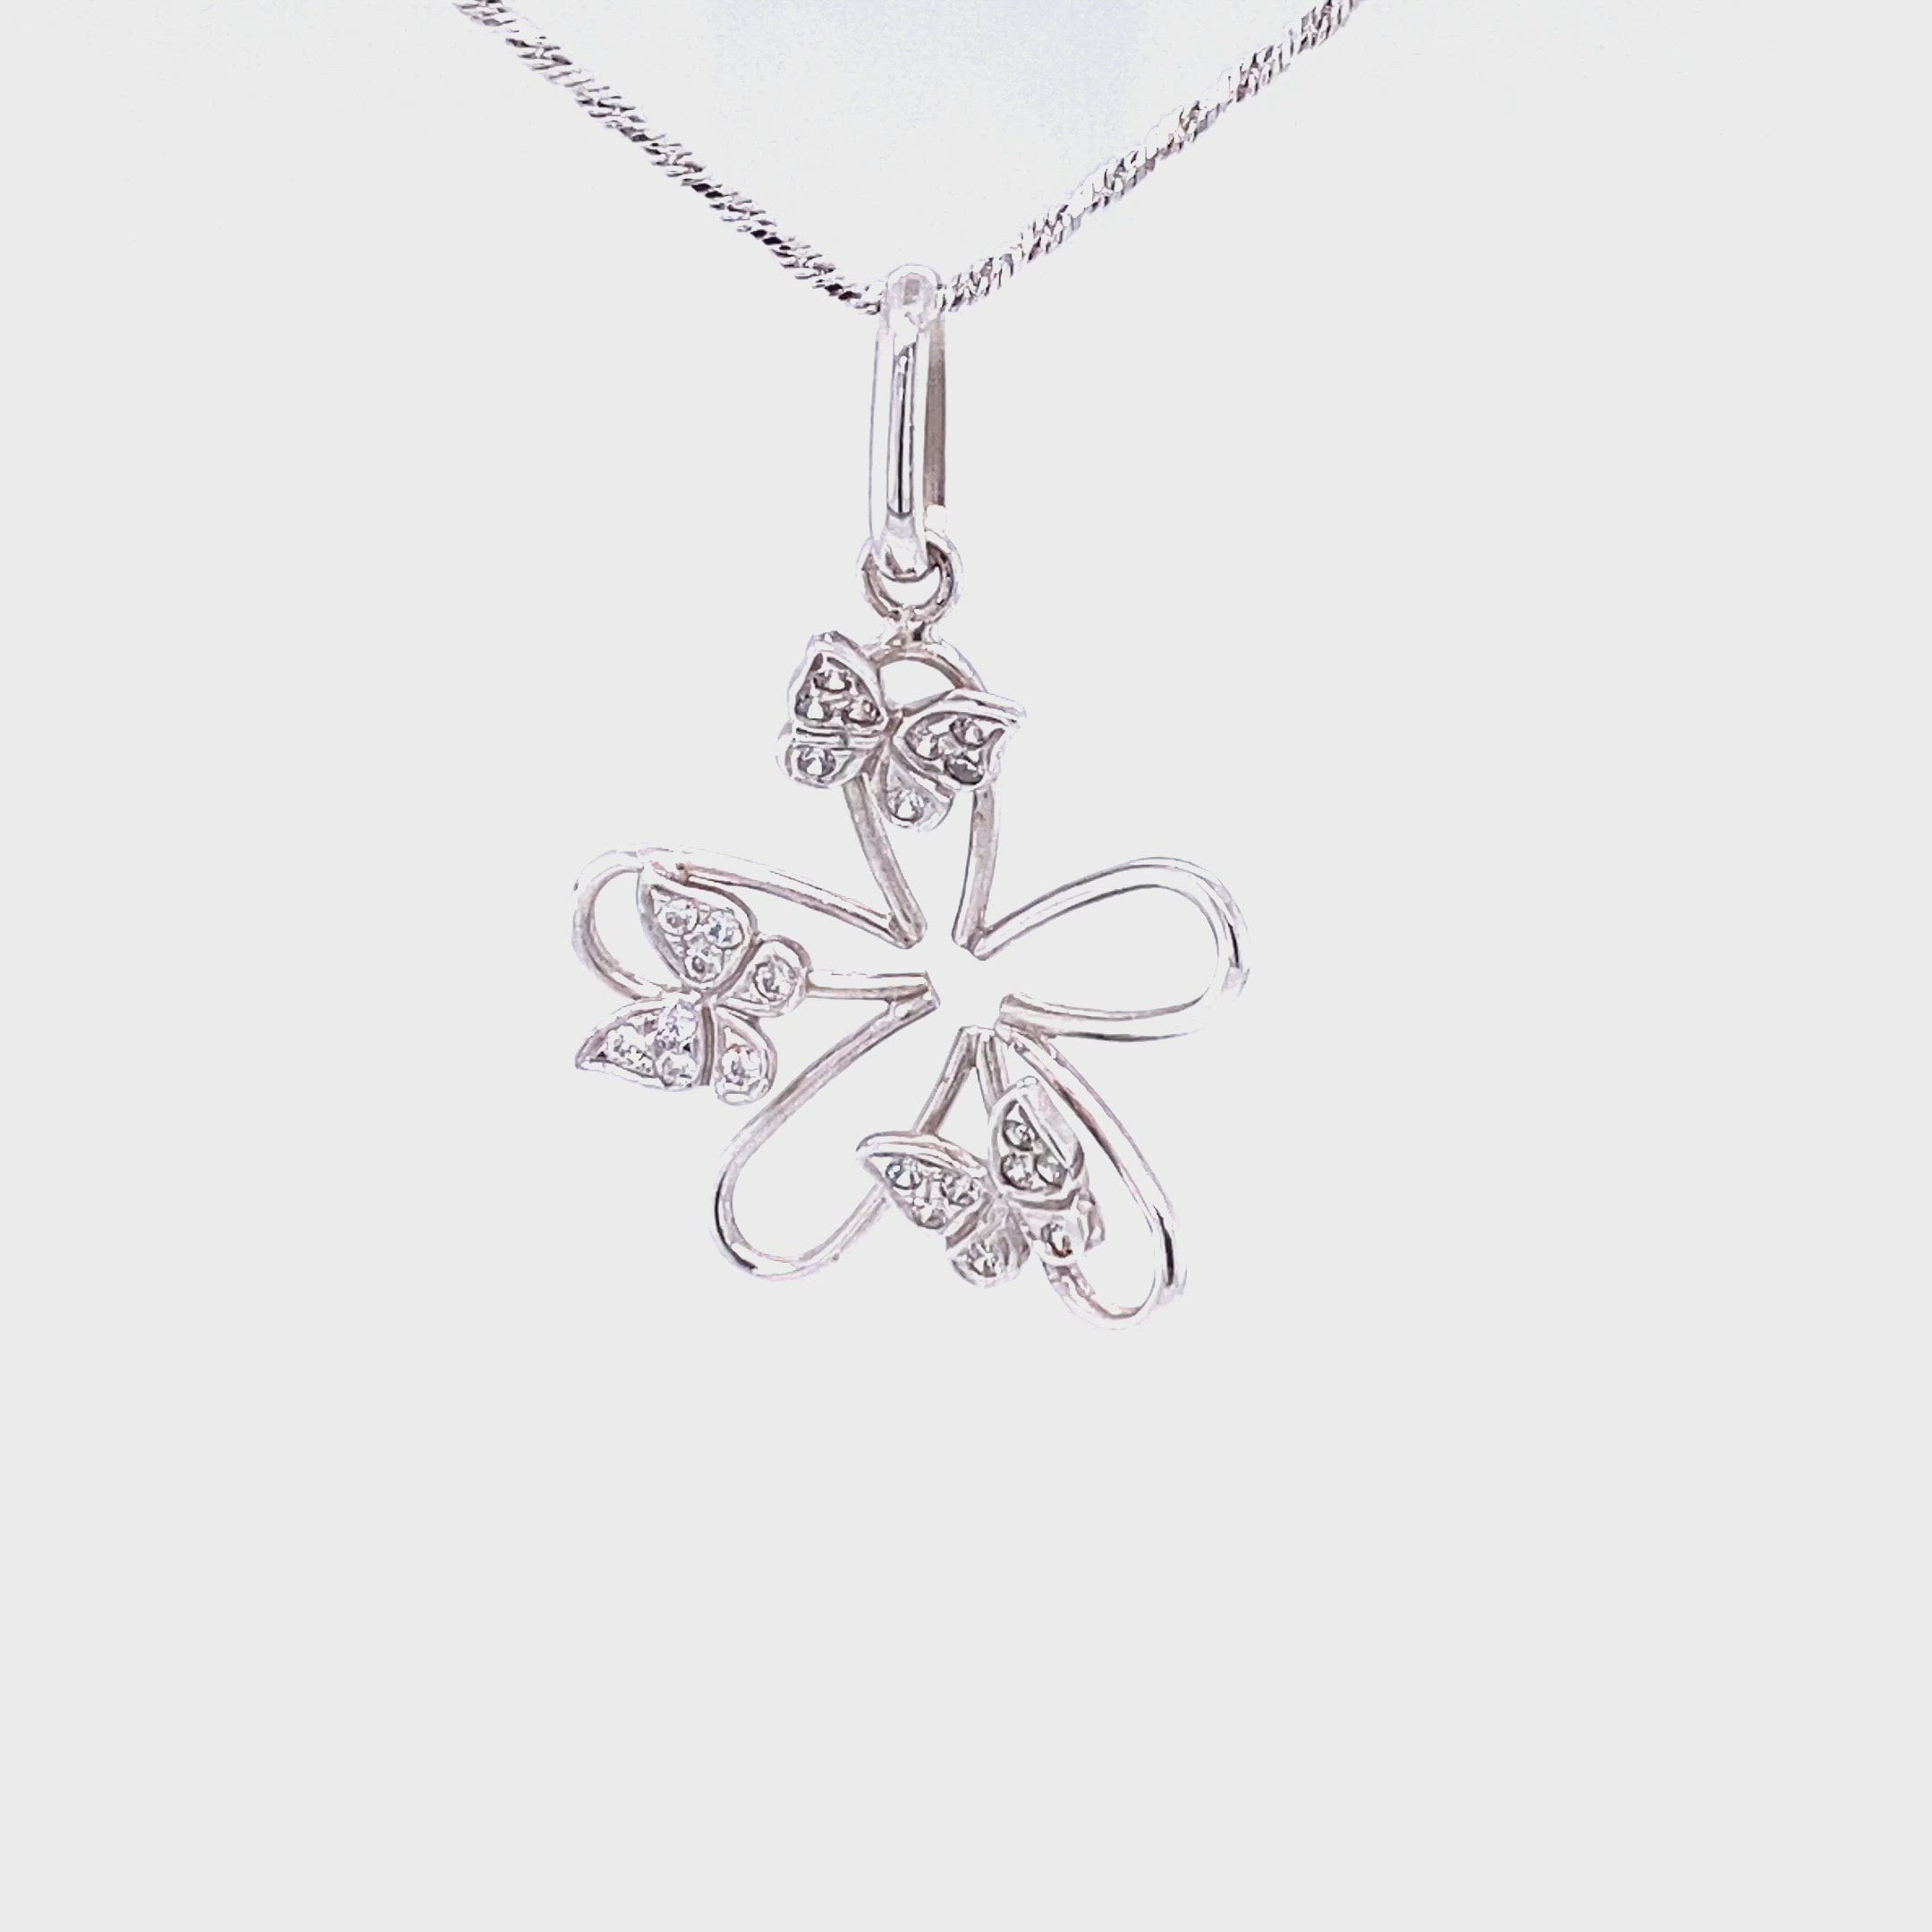 Natural Diamond Necklace 14K Solid White Gold .24tcw Butterfly Necklace Flower Necklace Floral Necklace Statement Necklace Estate Jewellery